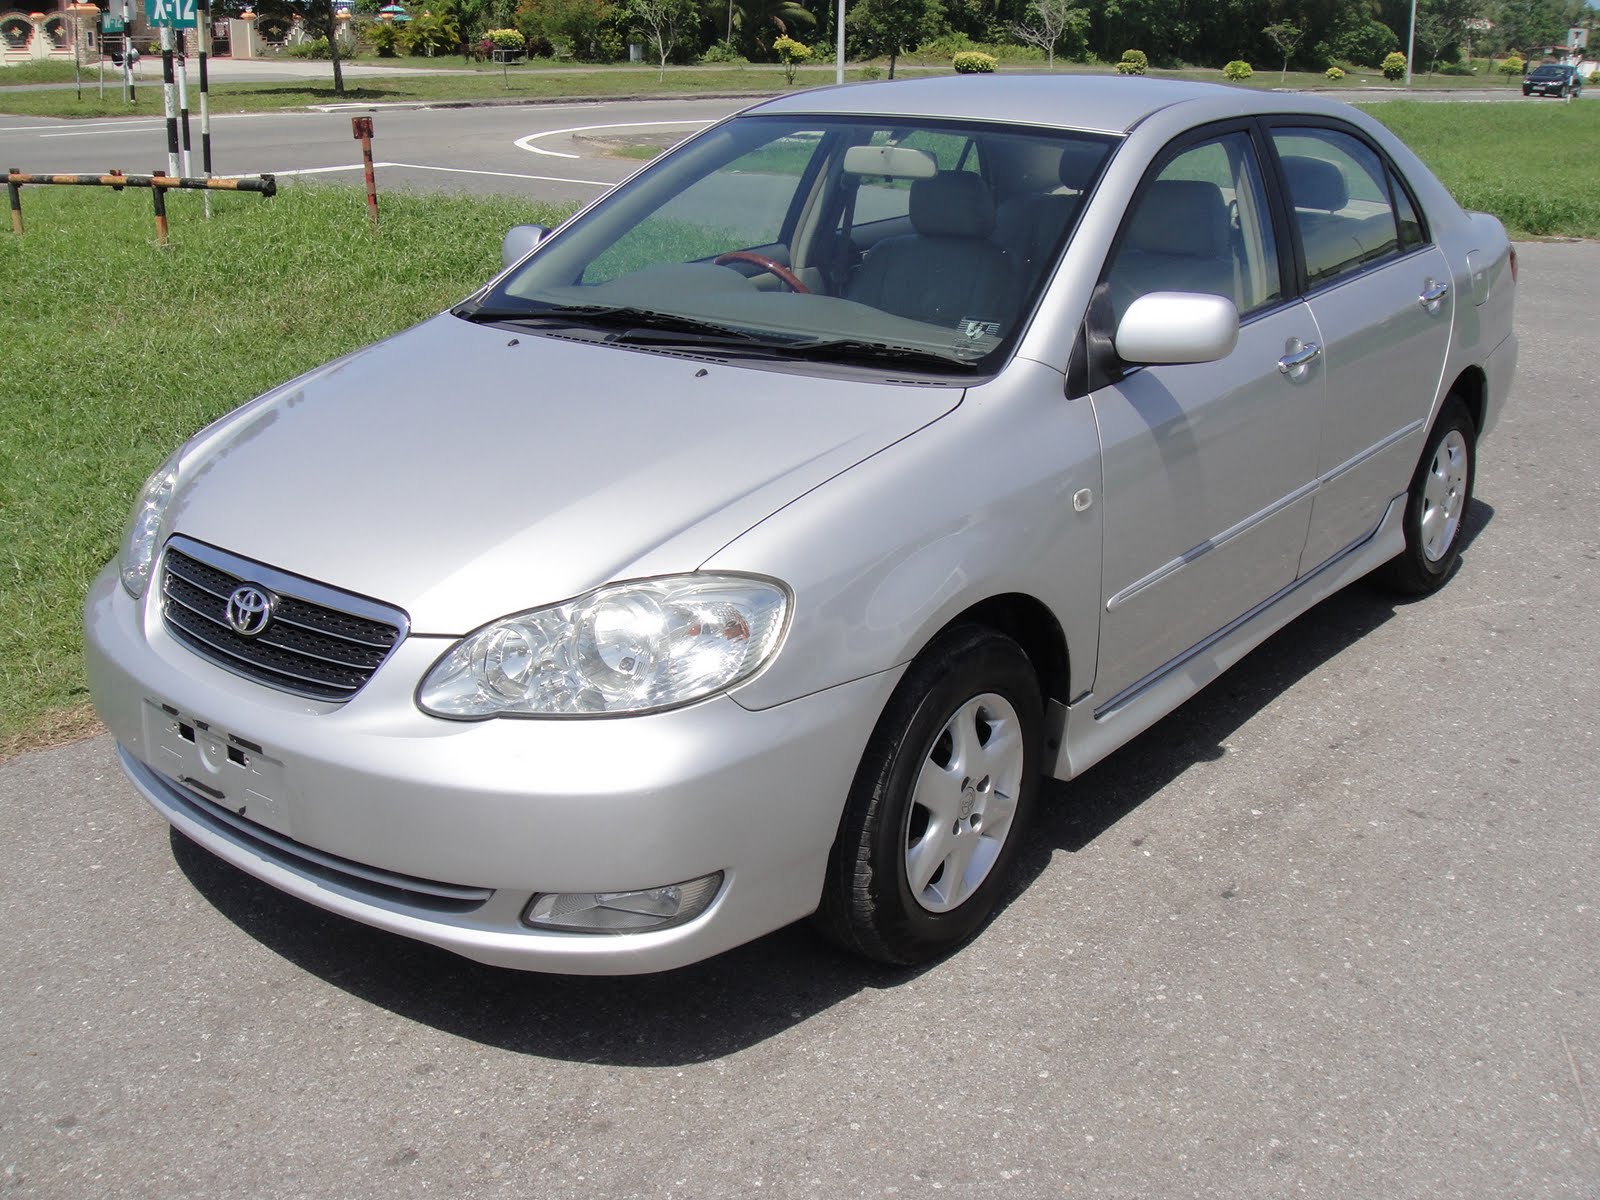 2007 Toyota Corolla Altis 1.6 related infomation